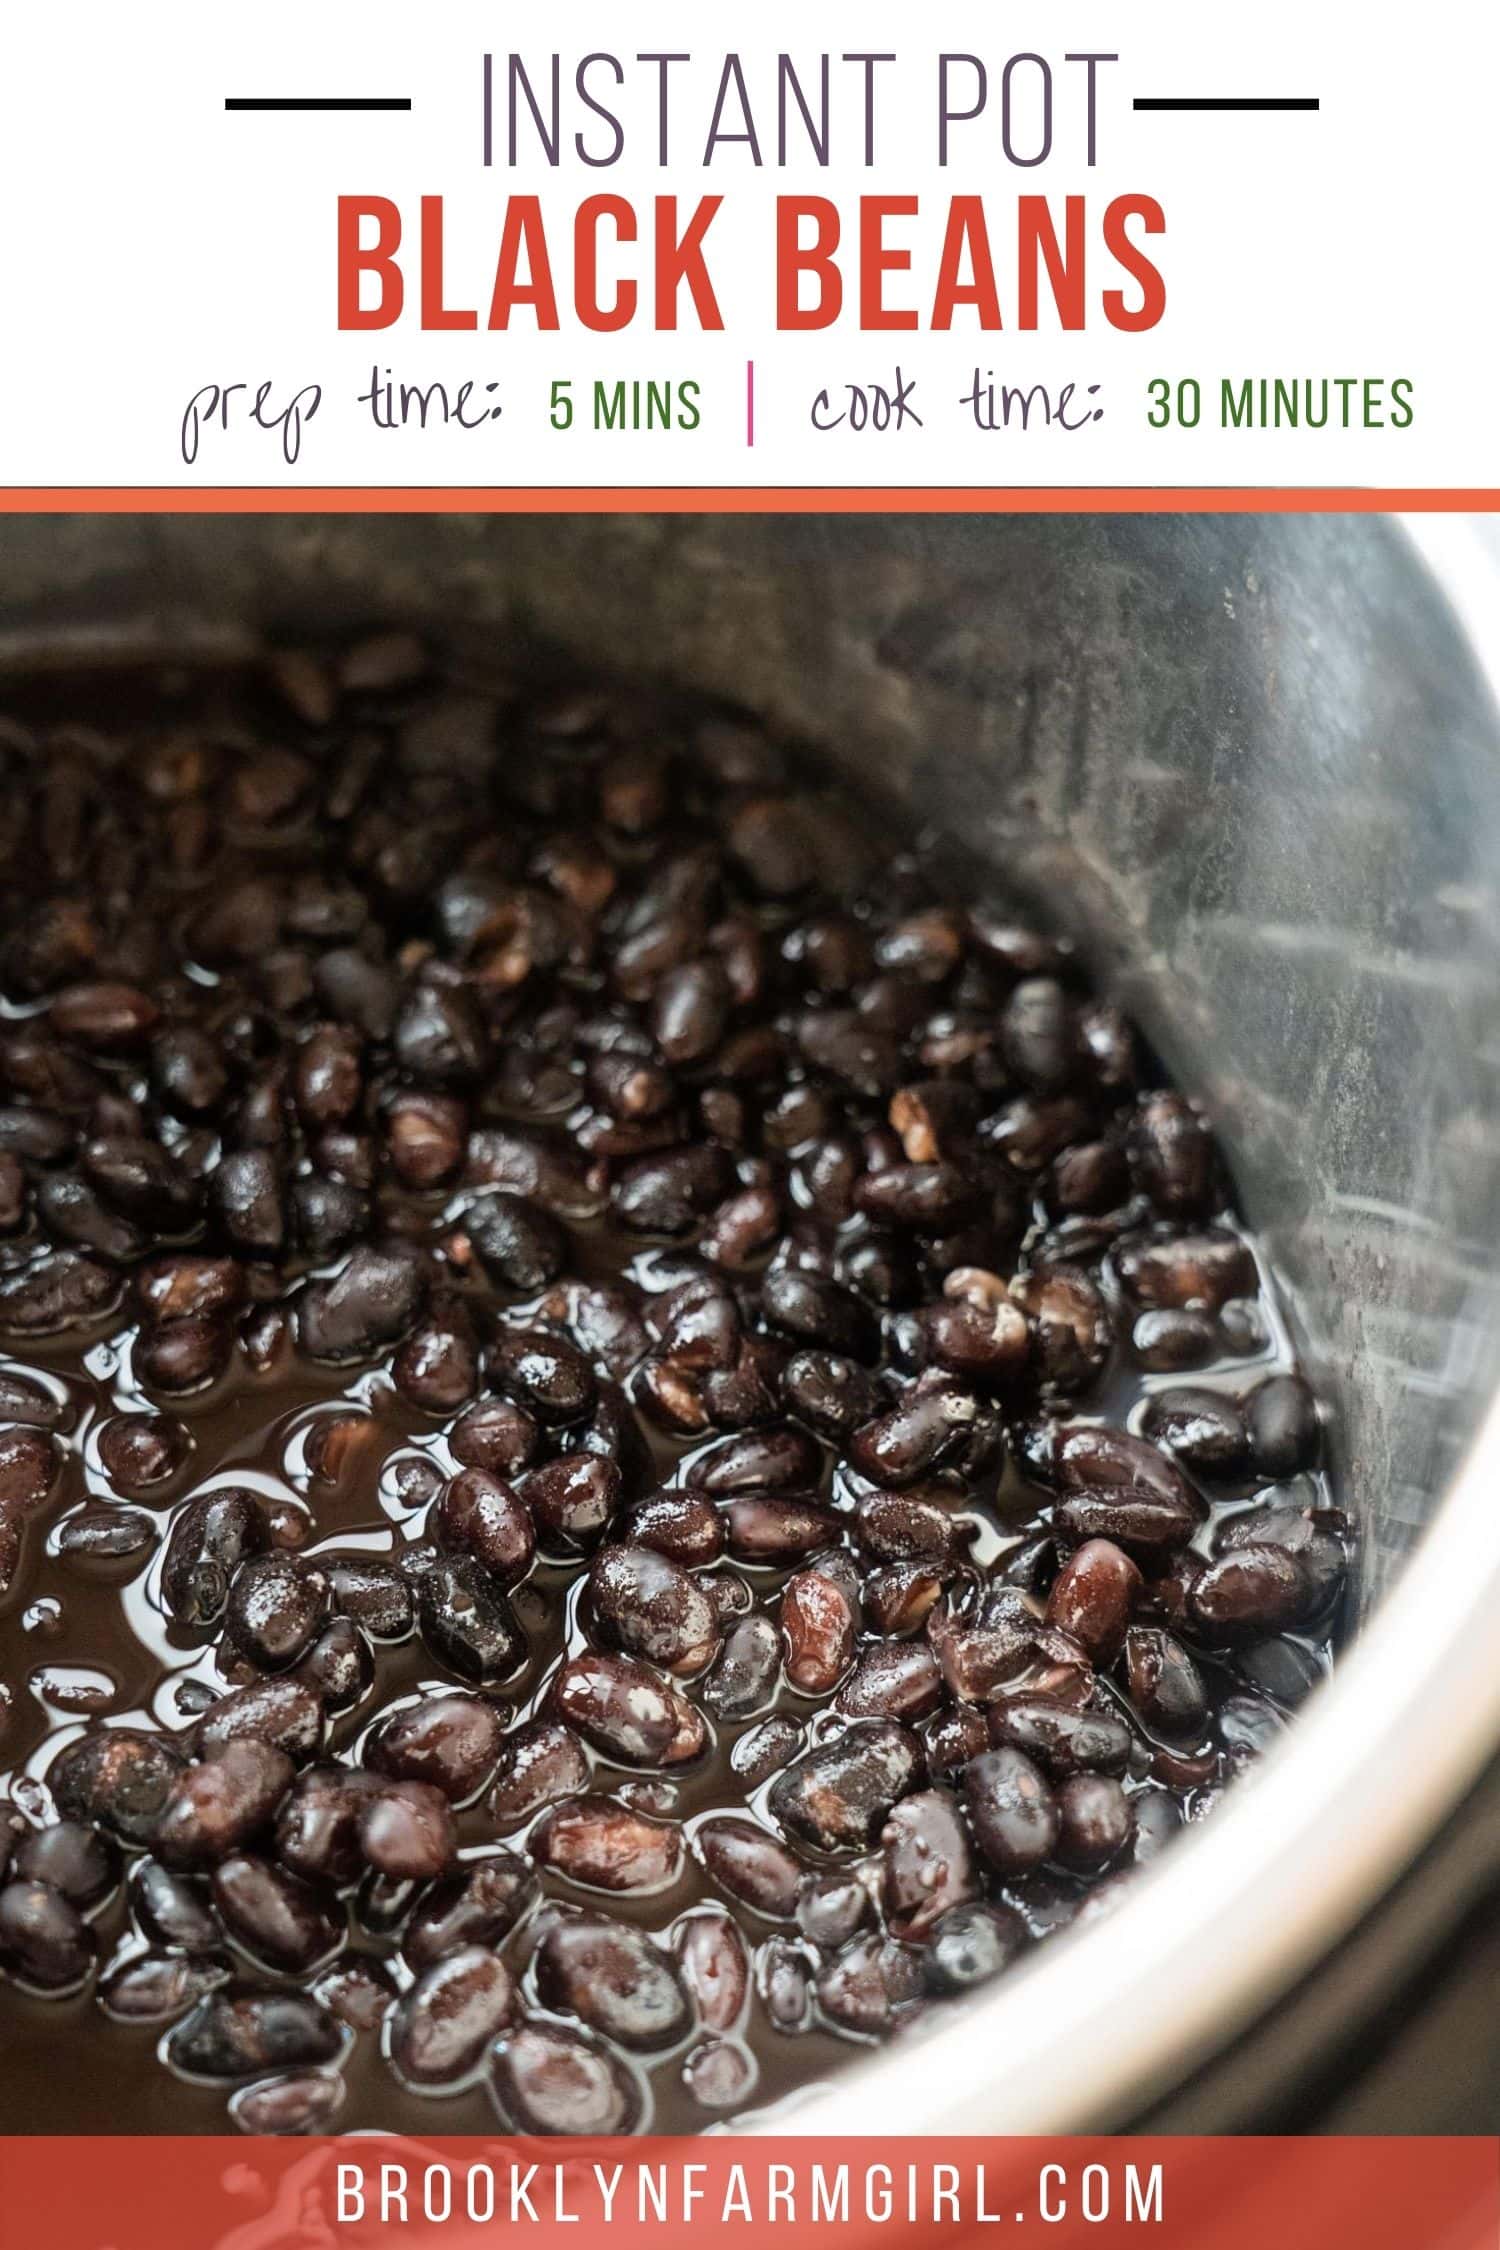 How to Make Instant Pot Black Beans